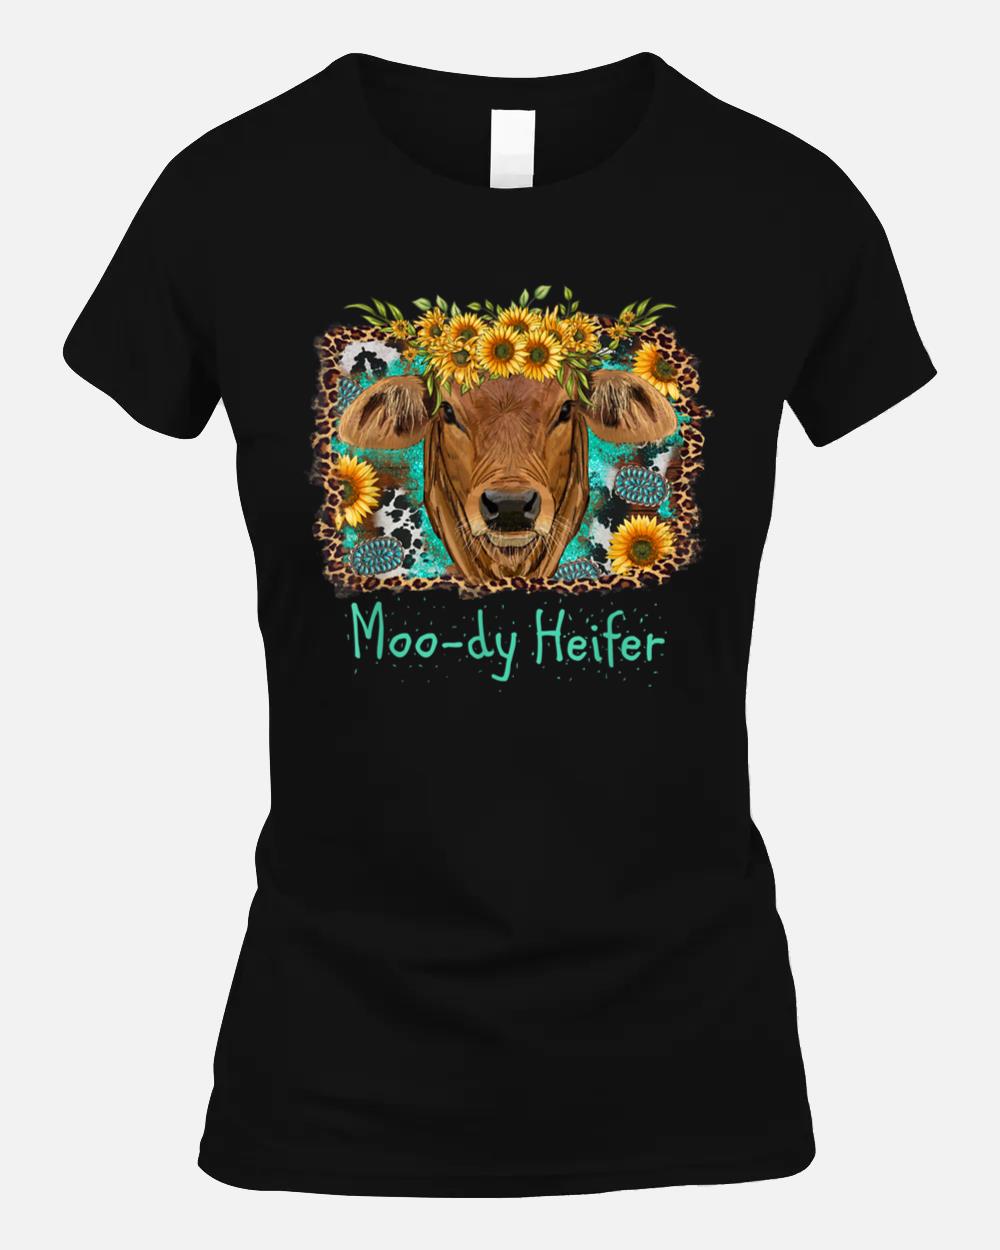 Moo-dy Heifer funny cow cattle farm humor graphic artwork Unisex T-Shirt